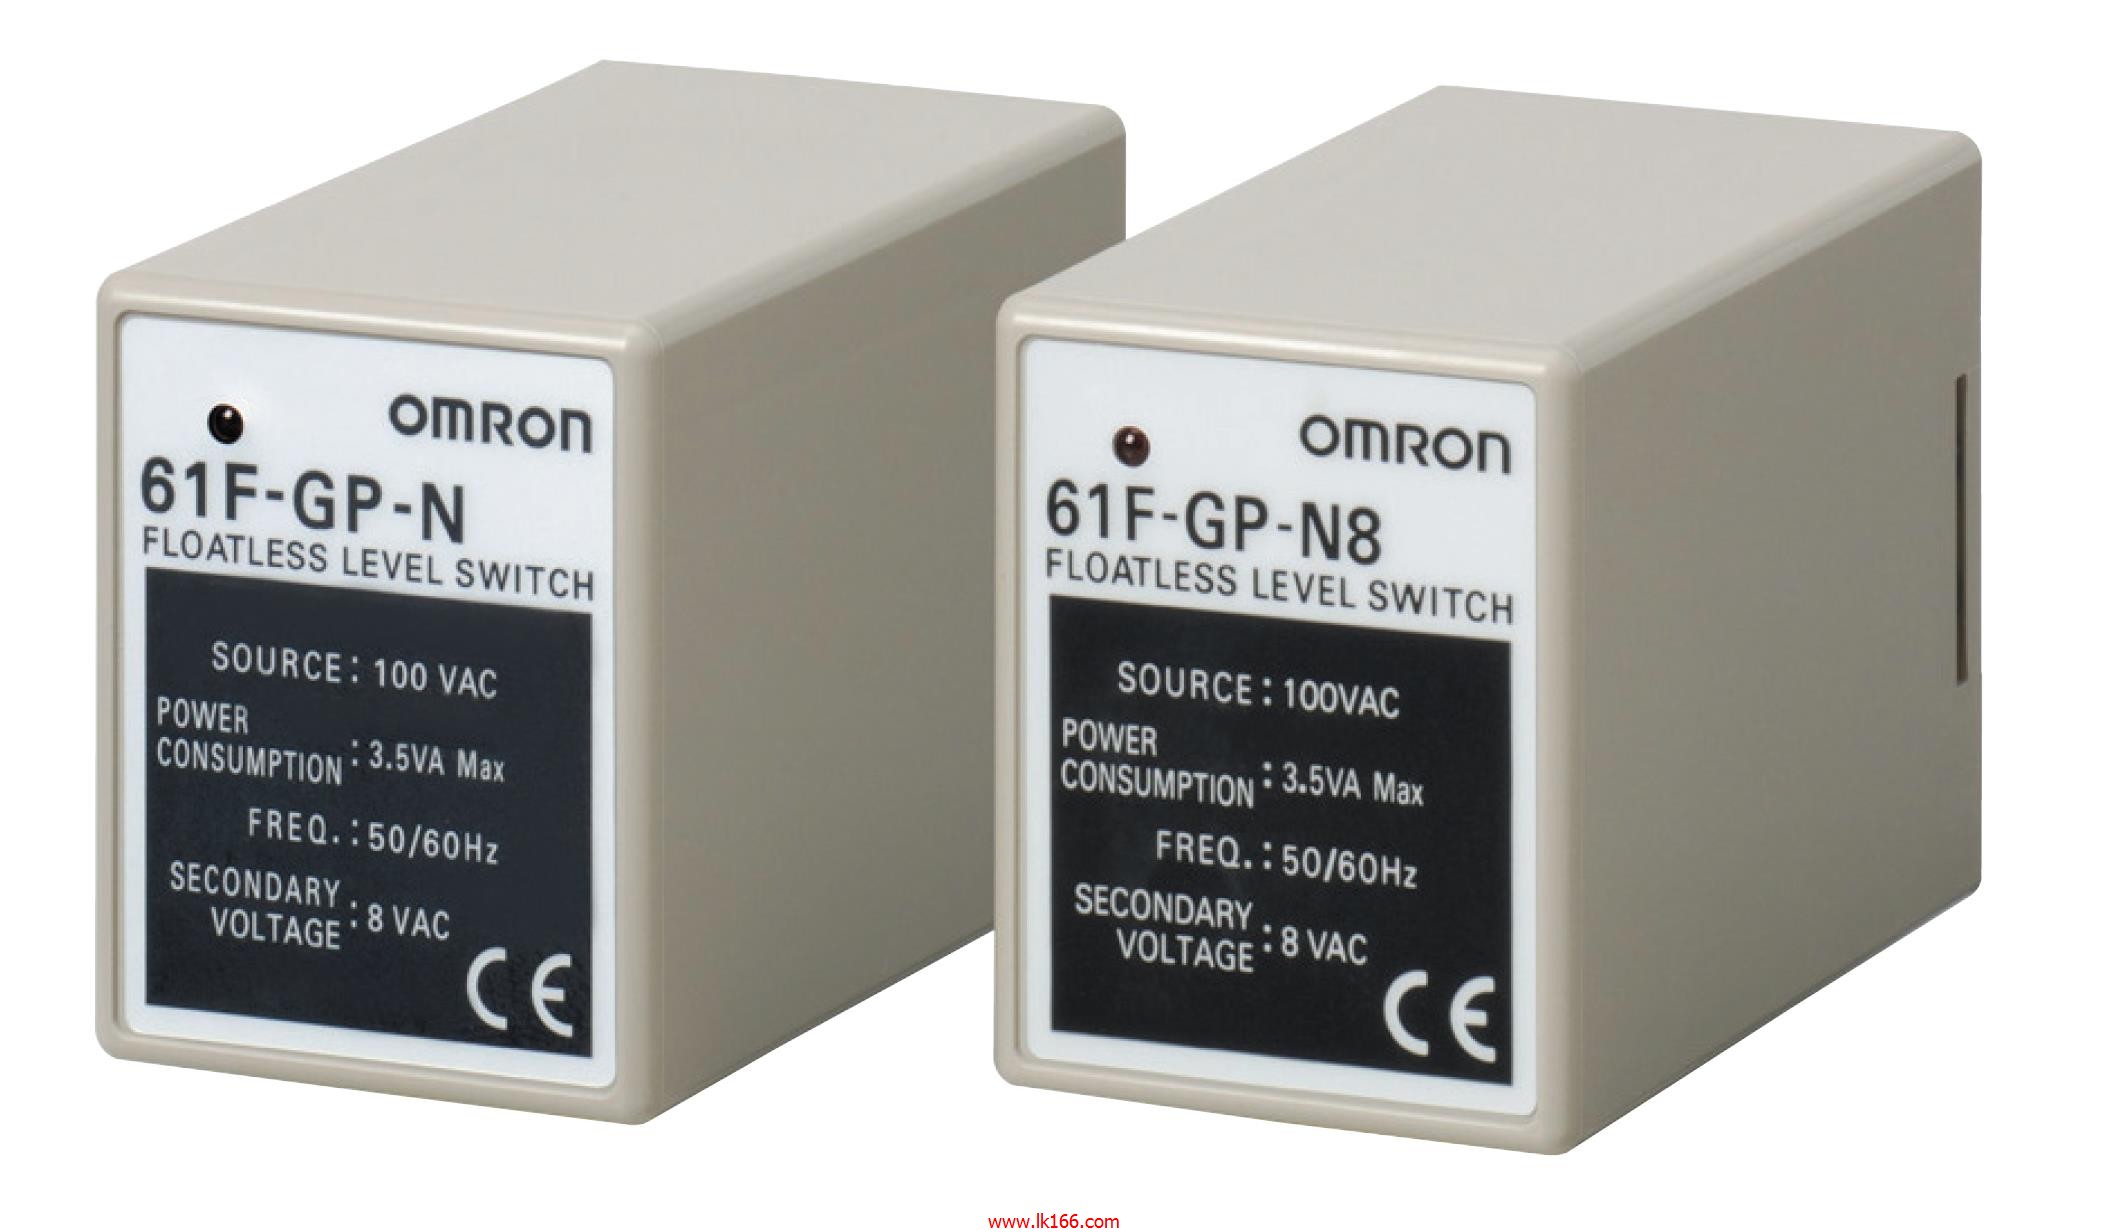 OMRON Floatless Level Switch (Compact, Plug-in Type) 61F-GP-N